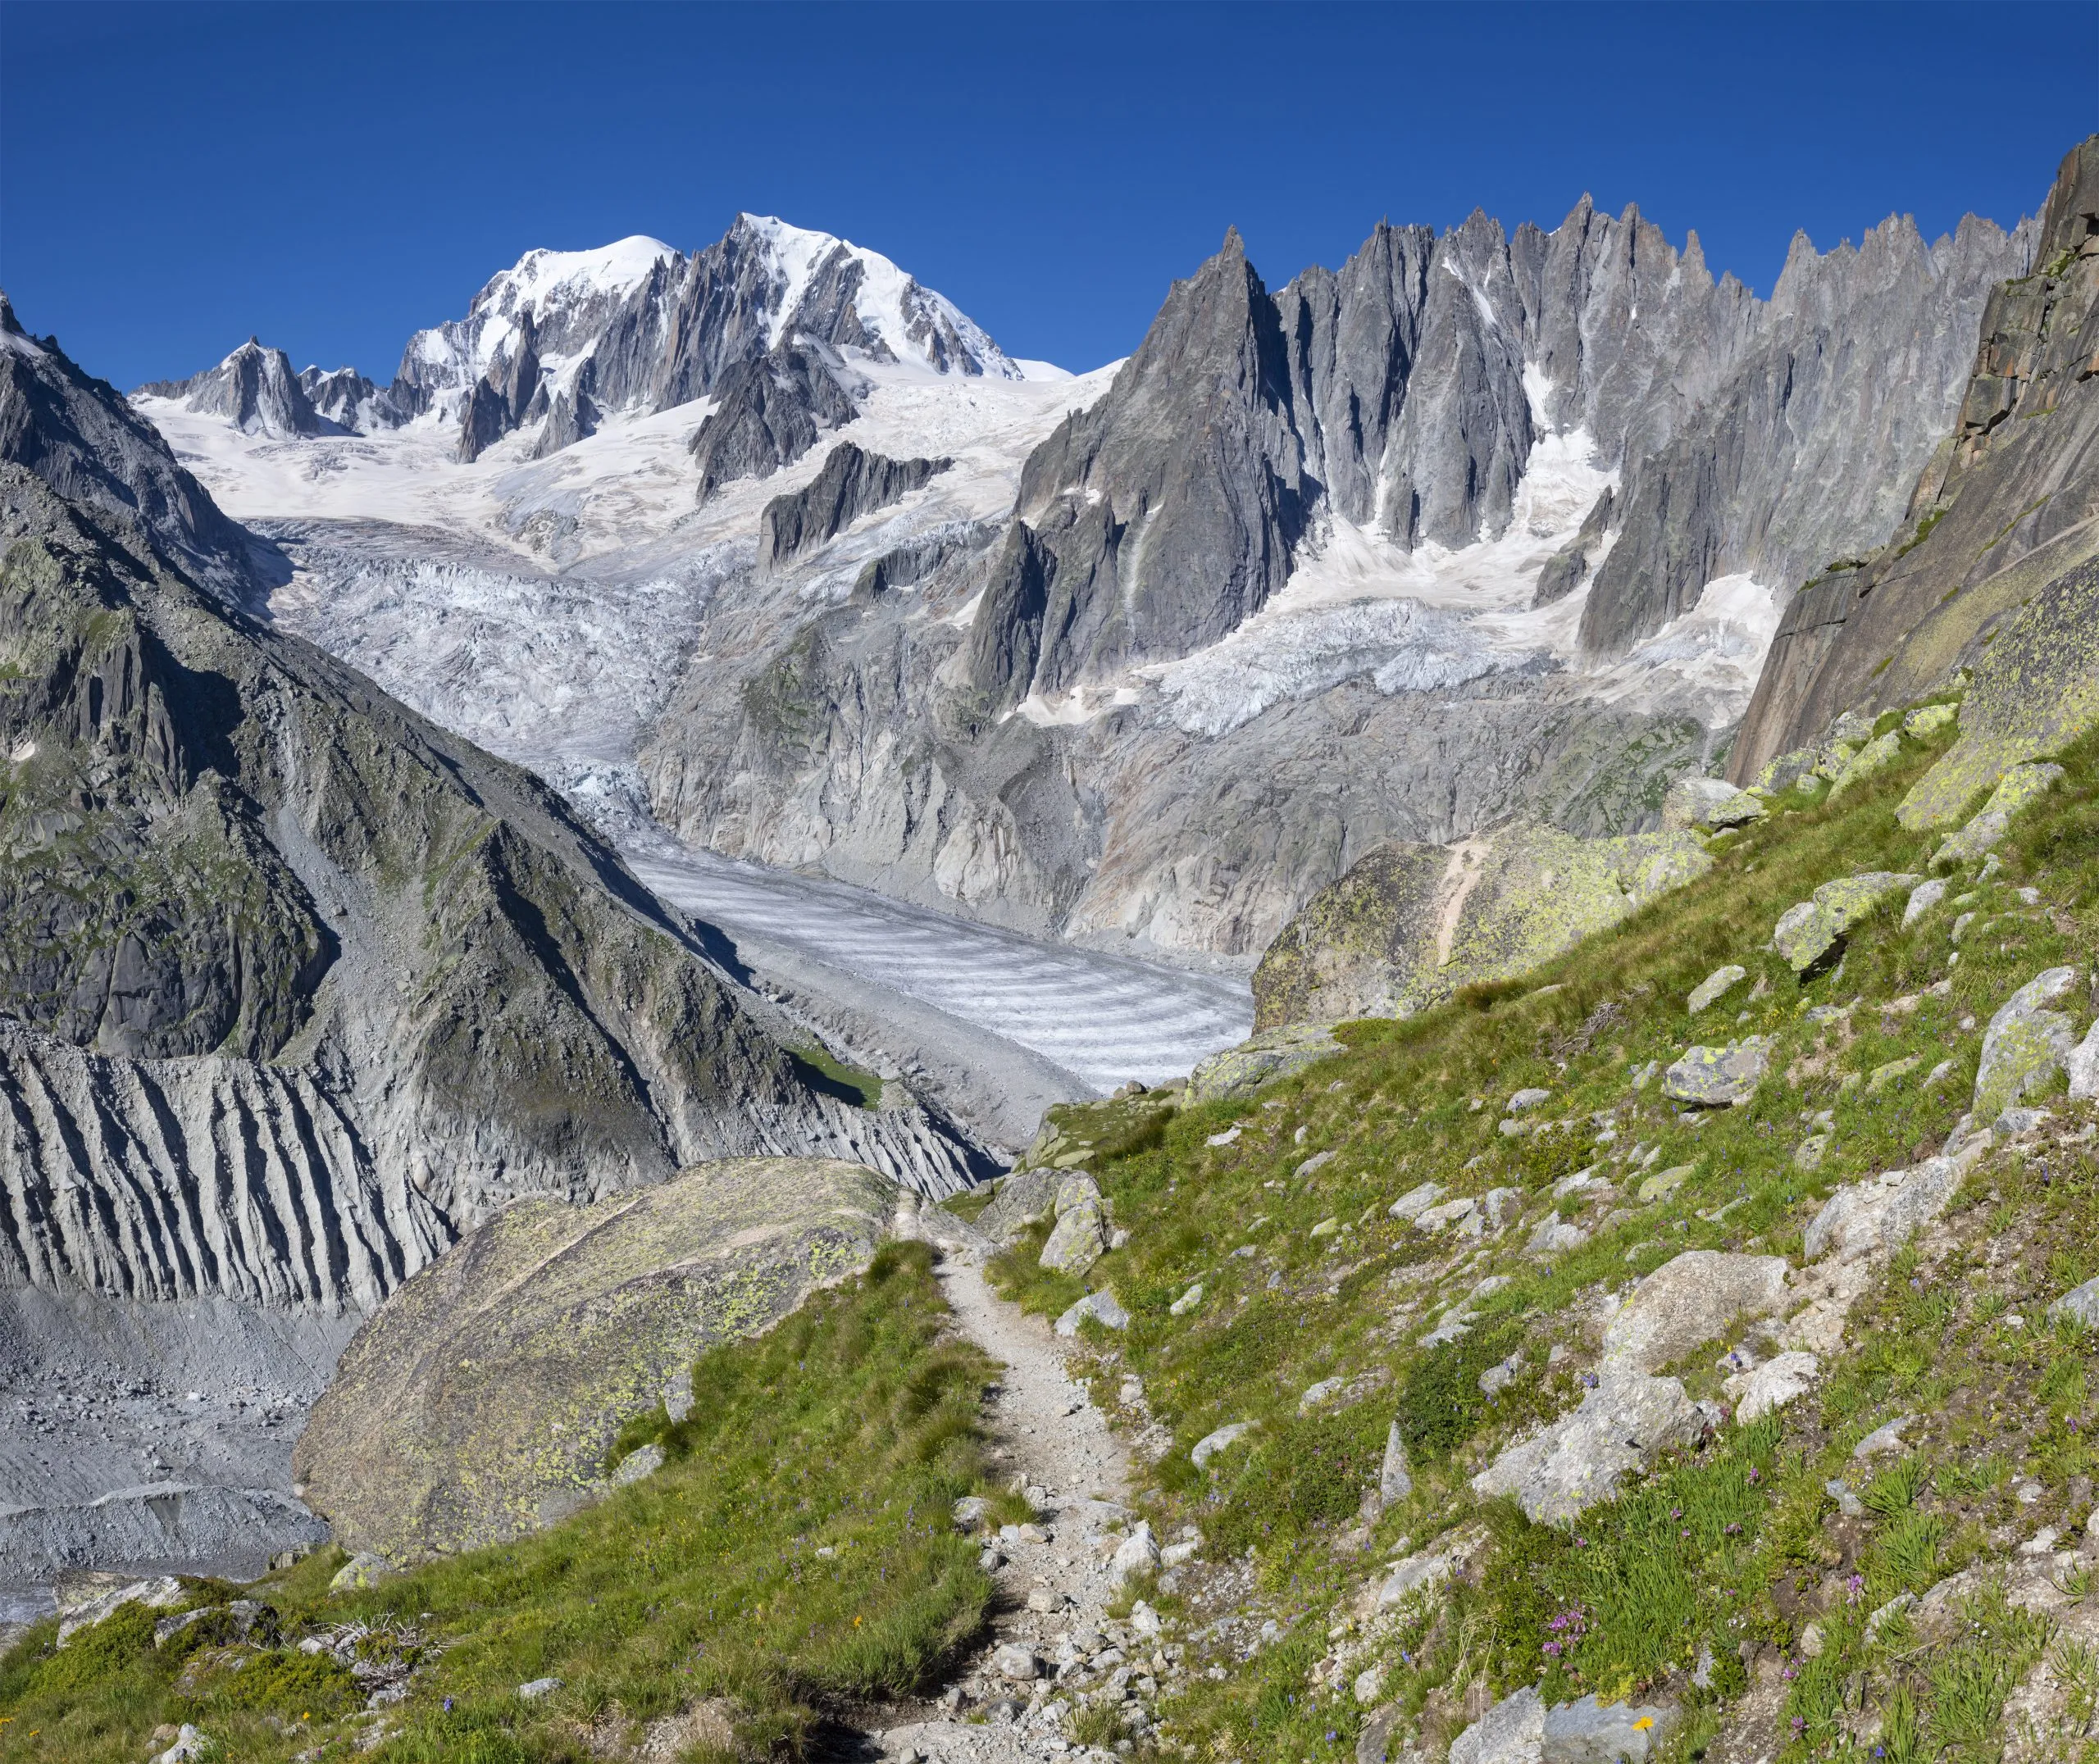 The Mont Blanc massif and  Les Aiguilles towers - Savoy alps.